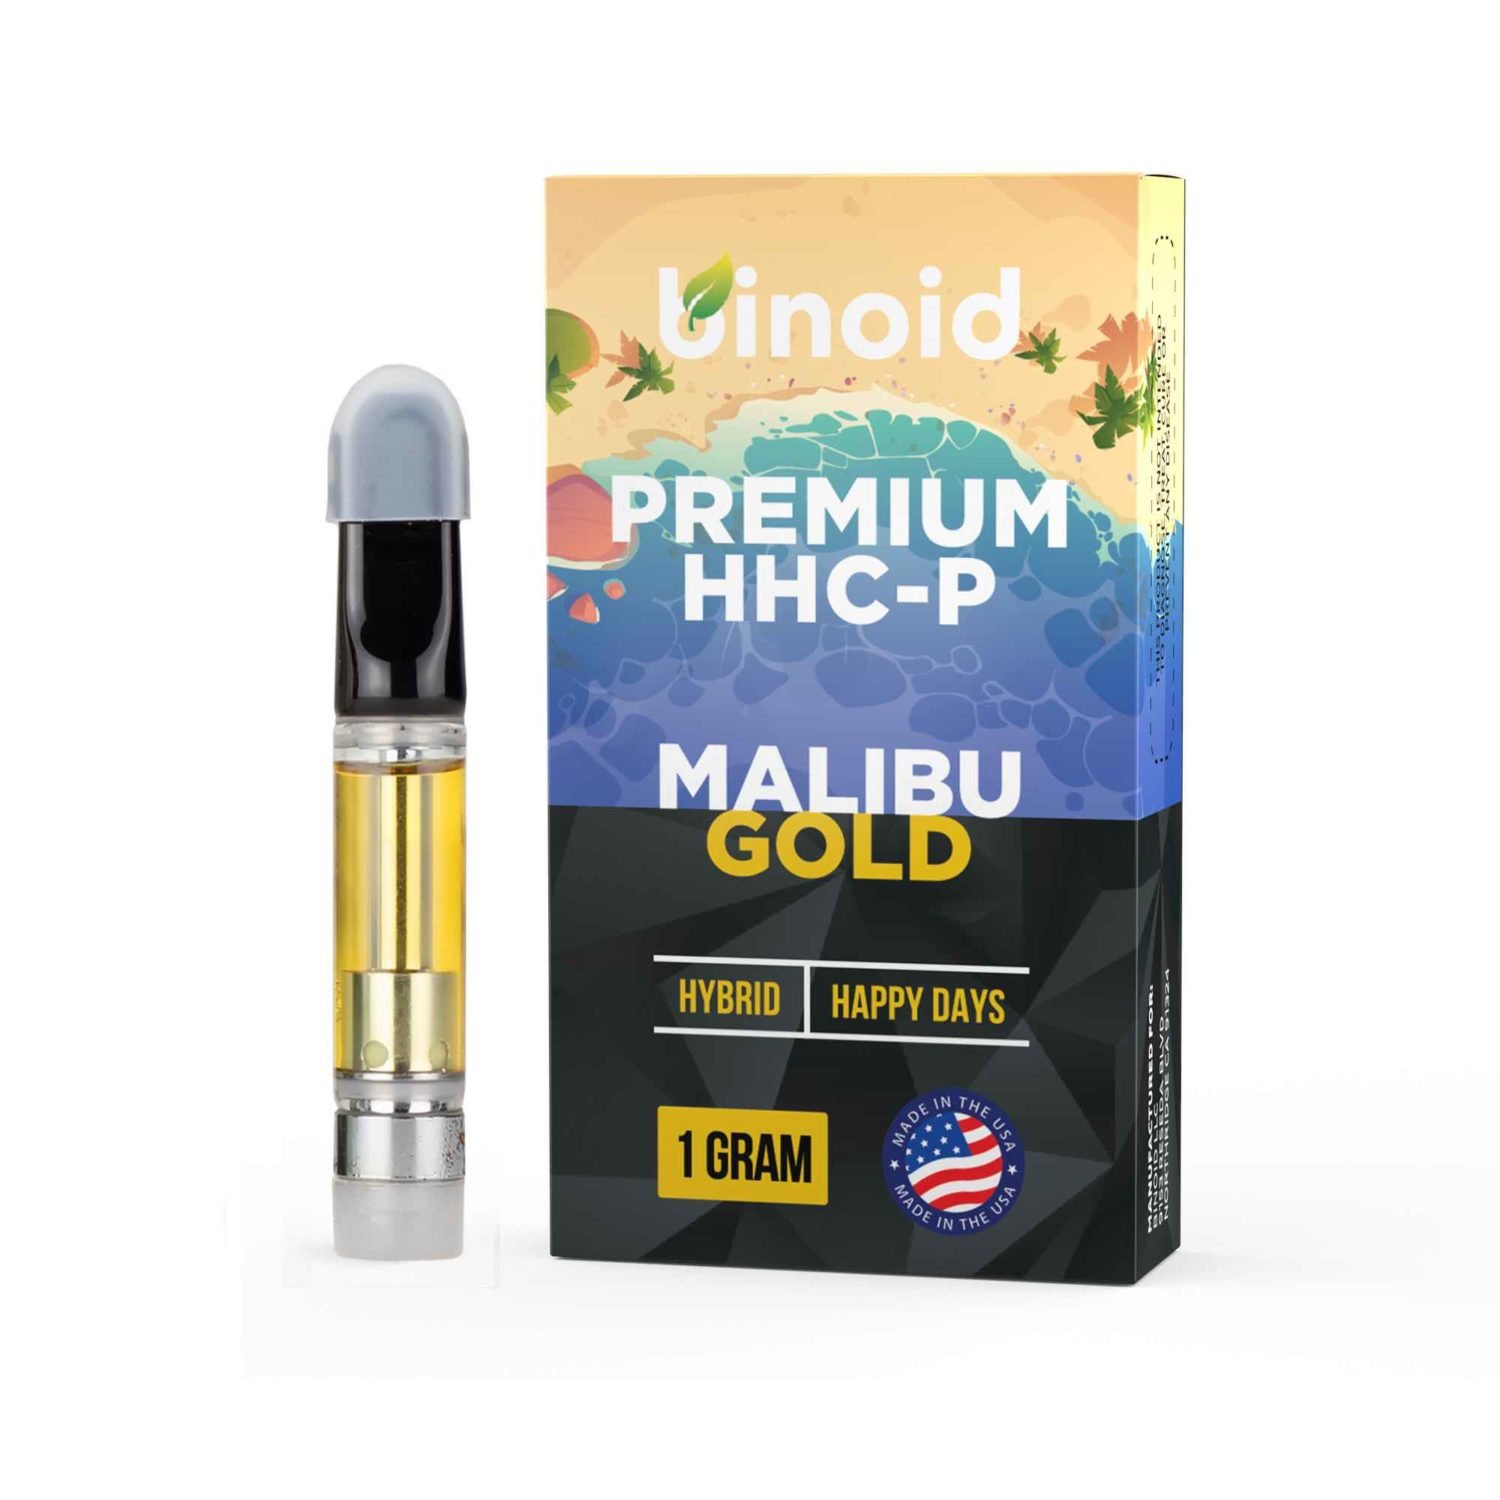 HHCP Vapes Malibu Gold For Sale Near Me Online Benefits Effects Anxiety Sleep Insomnia Pain Sativa Indica Hybrid